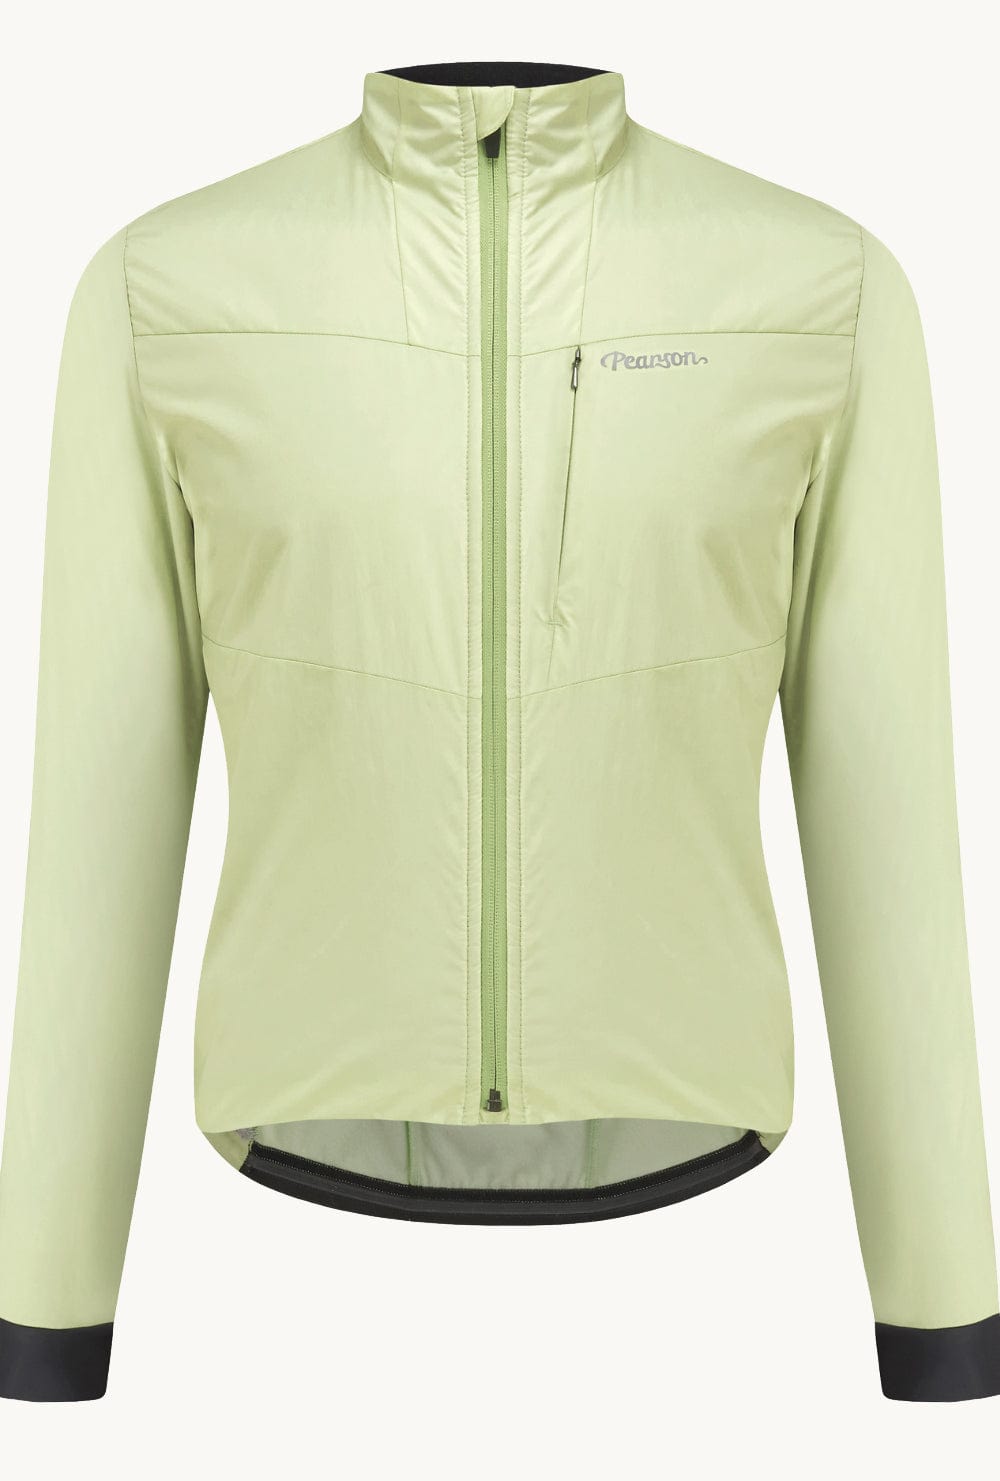 Pearson Cycles Pearson 1860, Test Your Mettle - Polartec® Insulated Jacket Shadow Lime, Shadow Lime / Medium